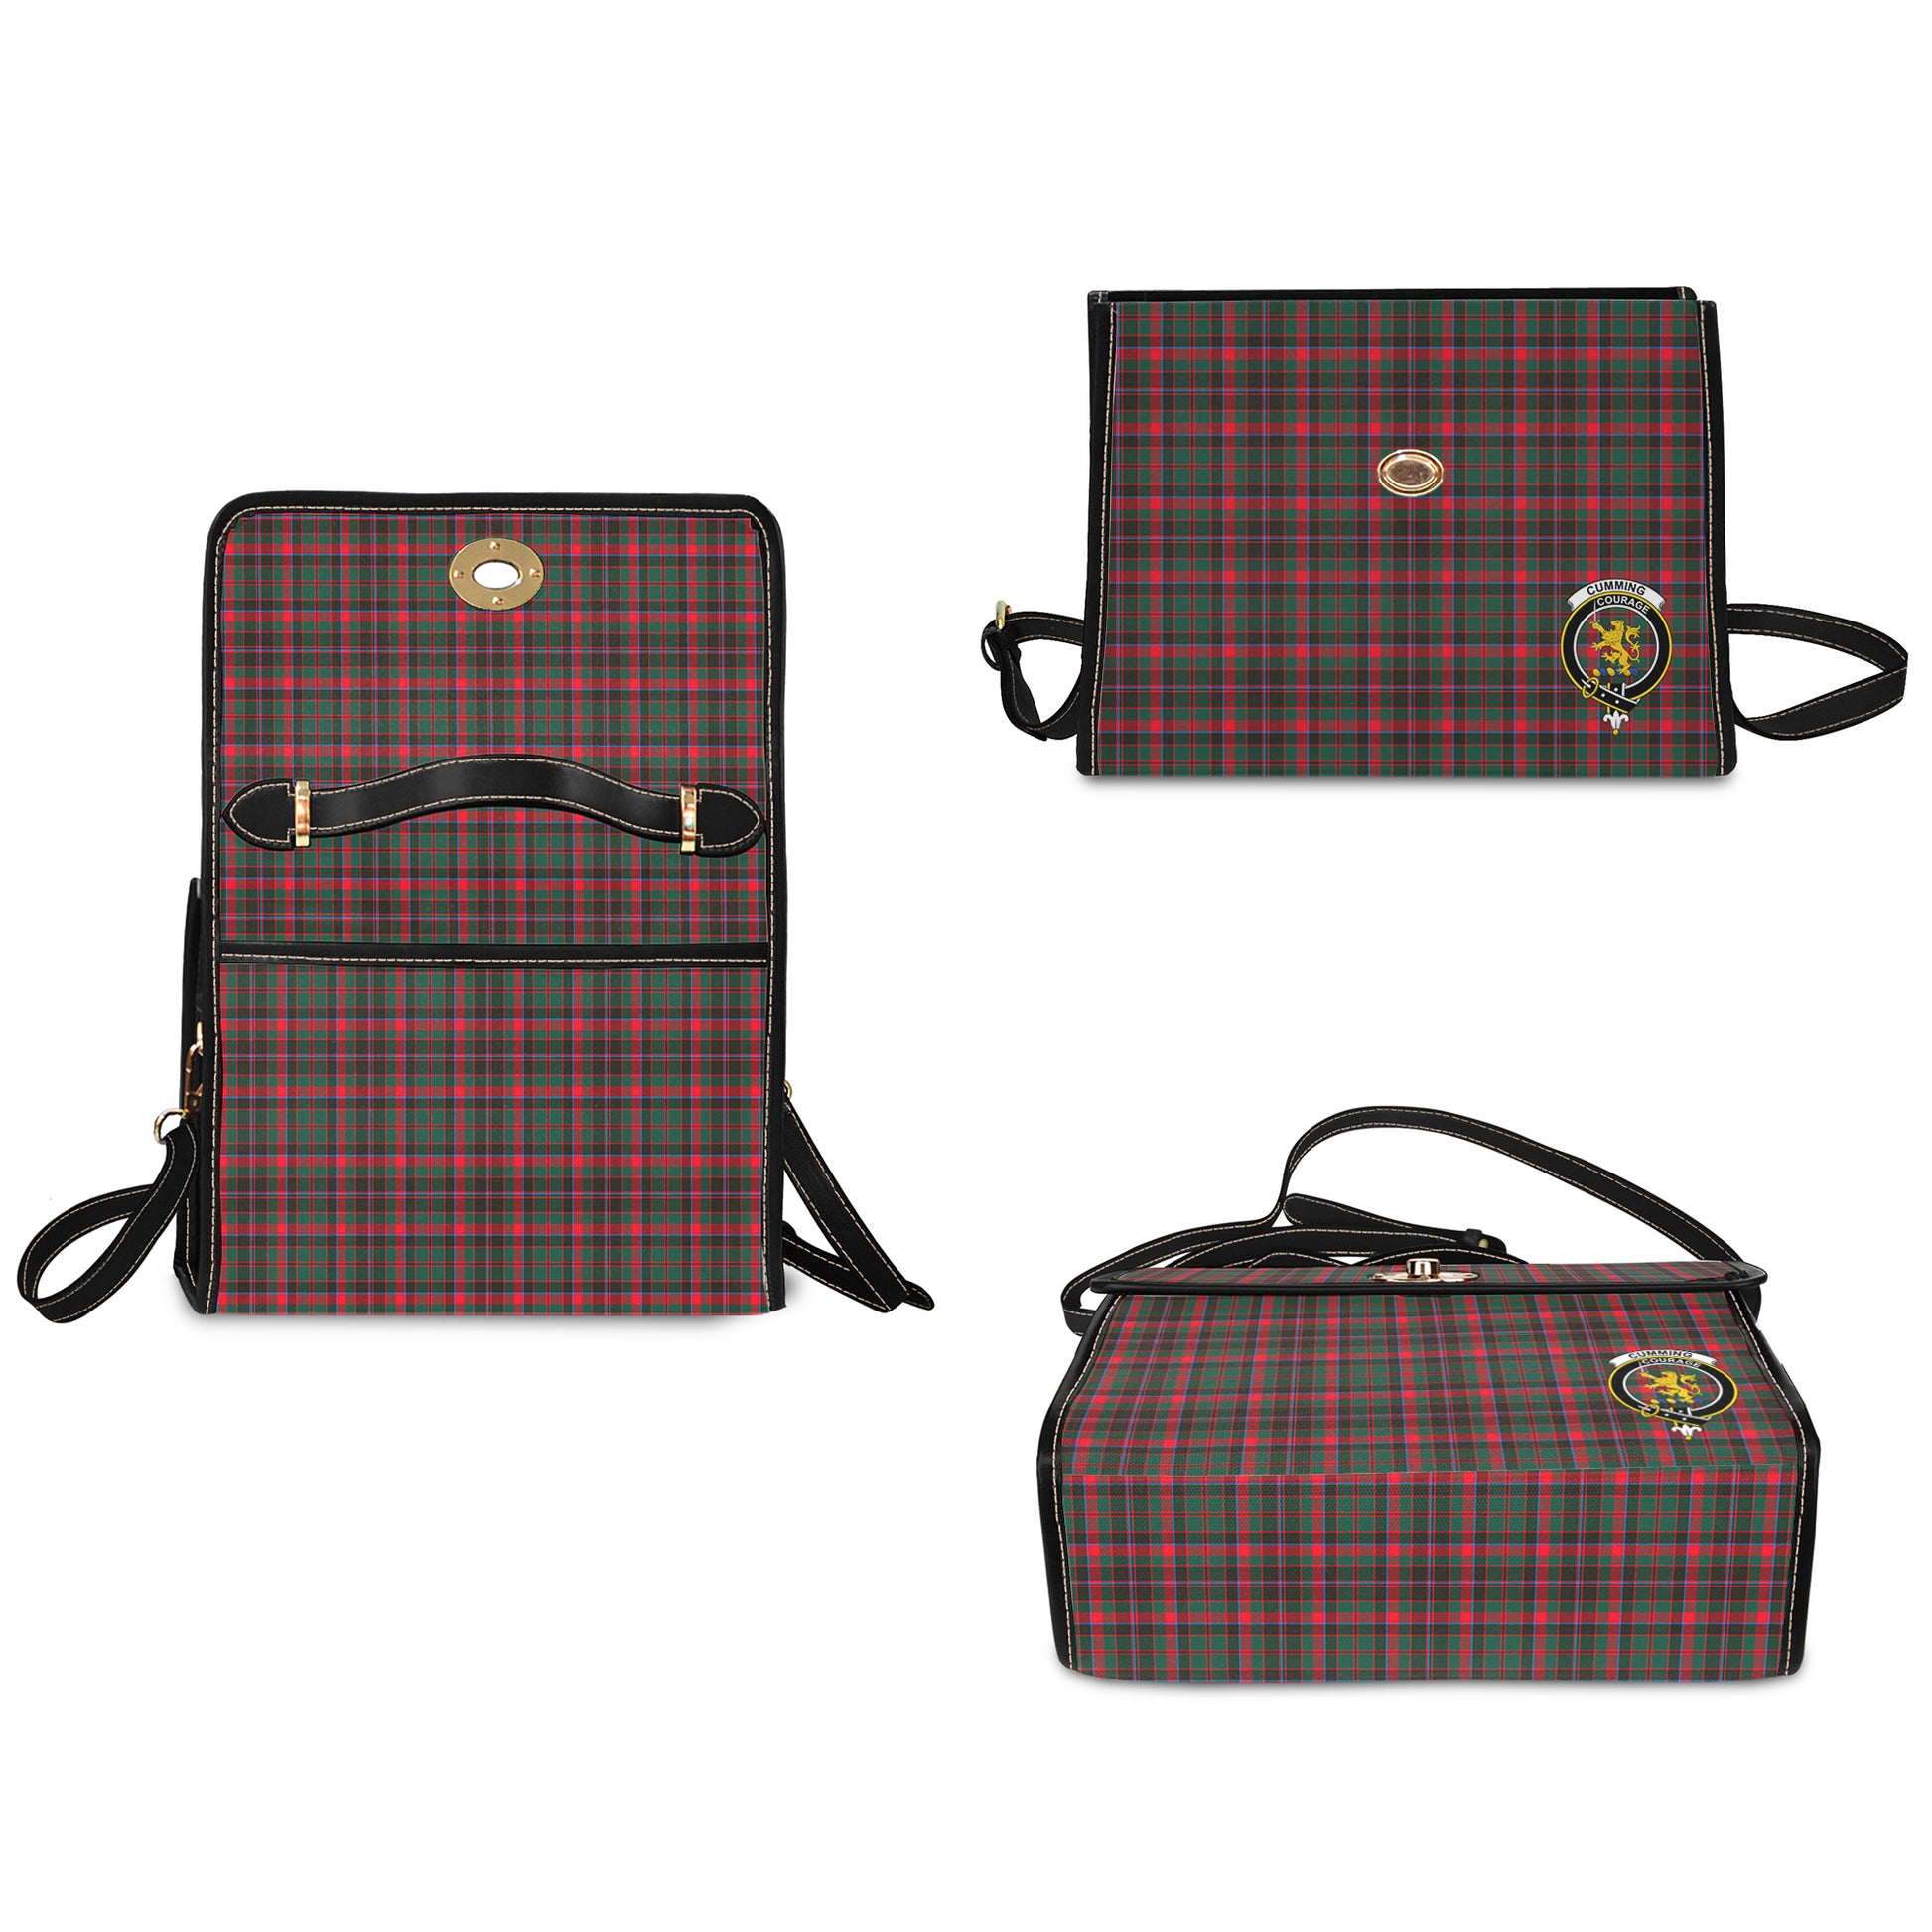 cumming-hunting-modern-tartan-leather-strap-waterproof-canvas-bag-with-family-crest